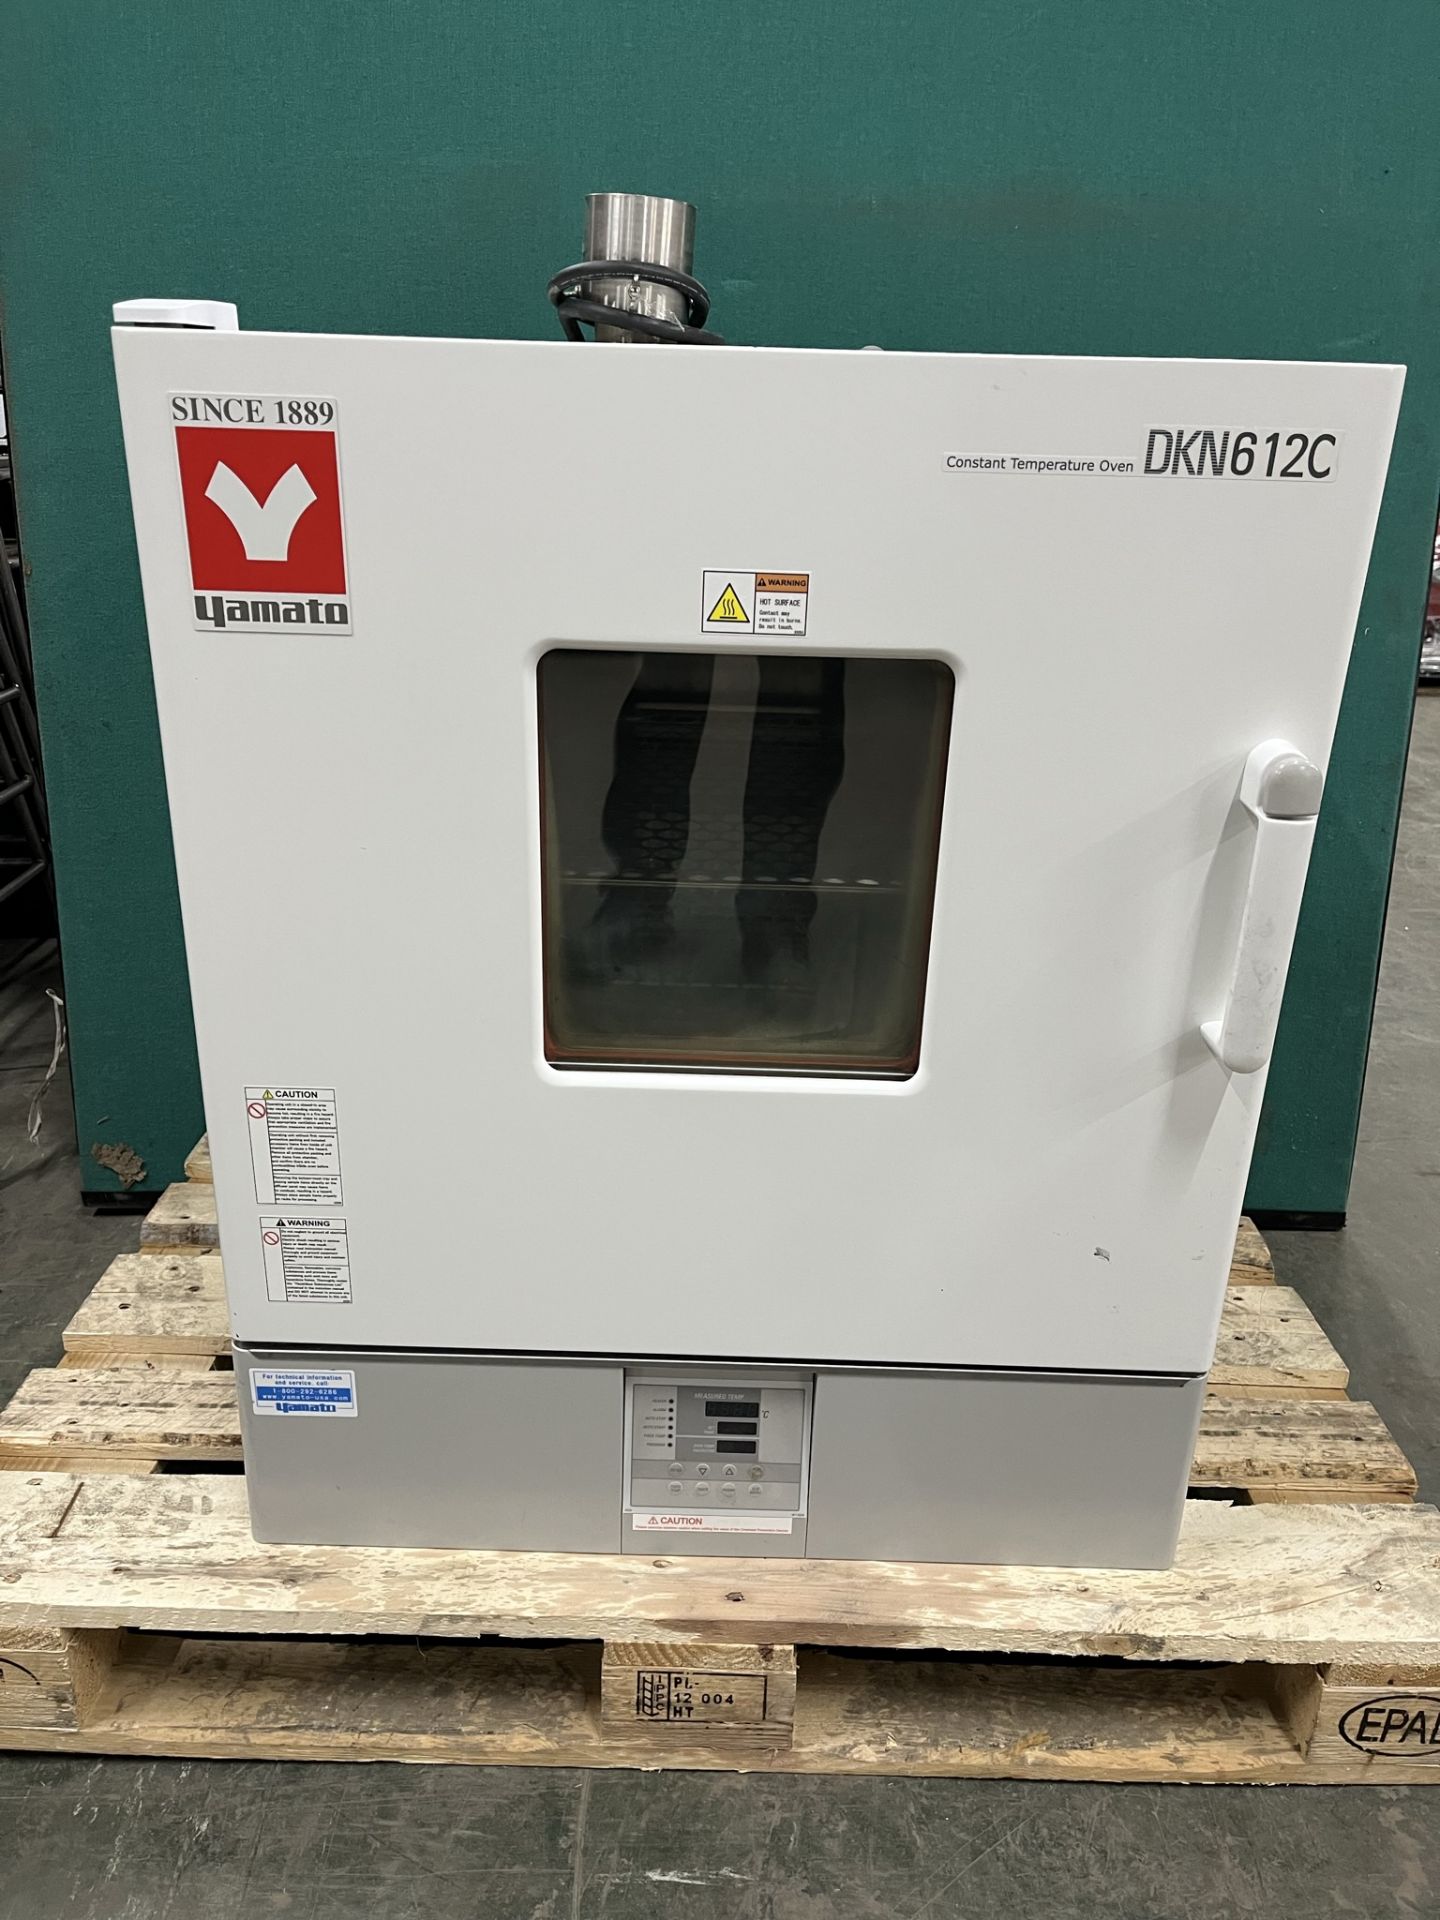 Yamato DKN-612C Forced Convection Oven